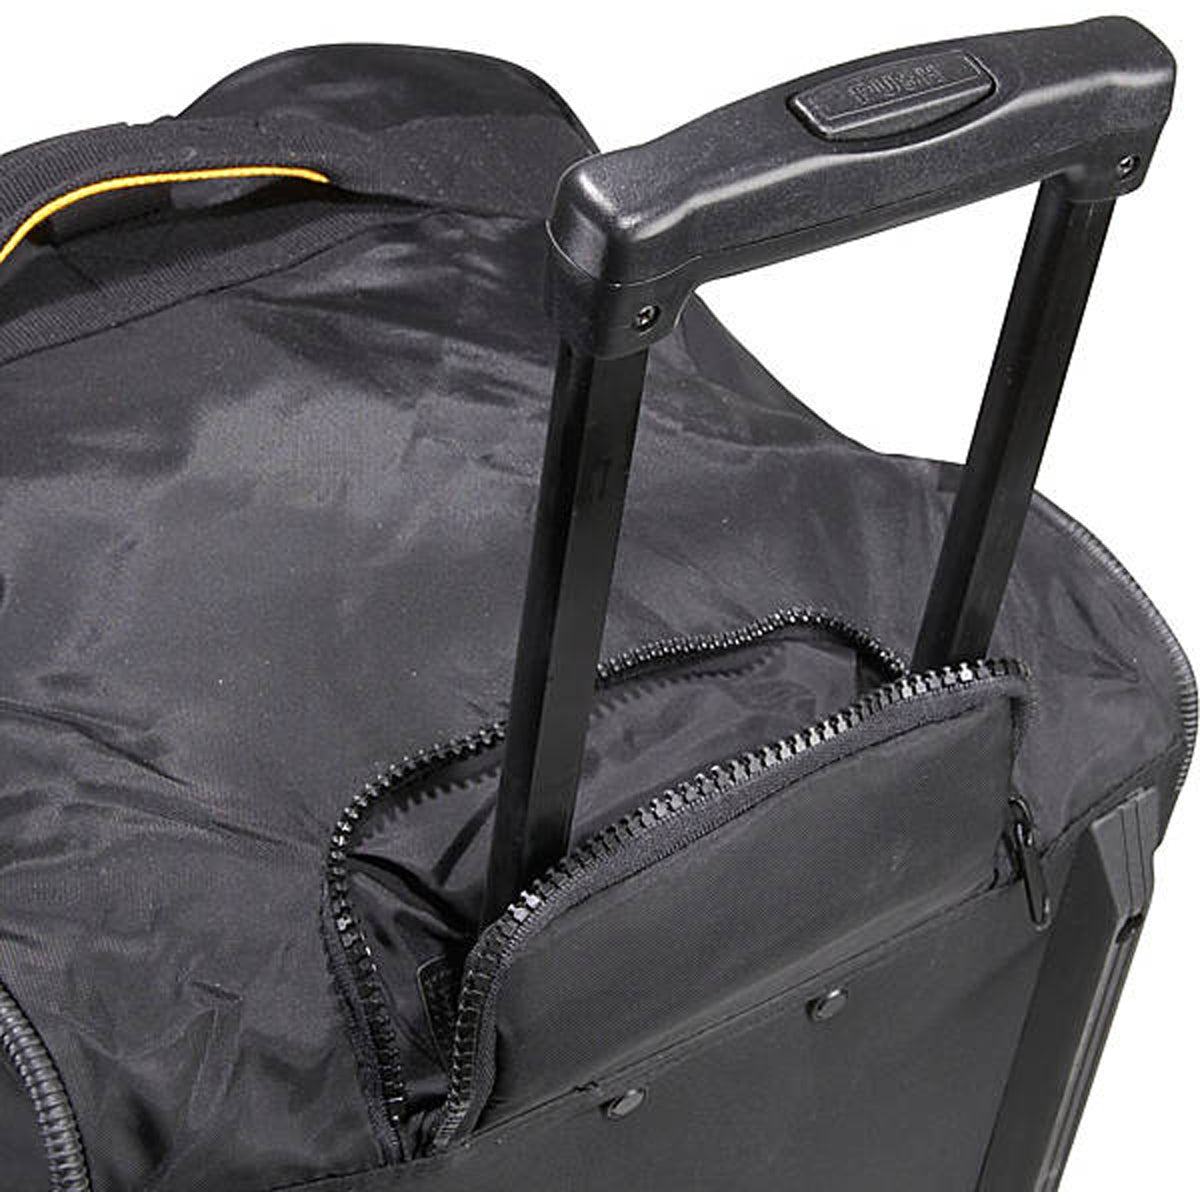 AILOUIS 36 Inch Expandable Rolling Duffle Bag Extra